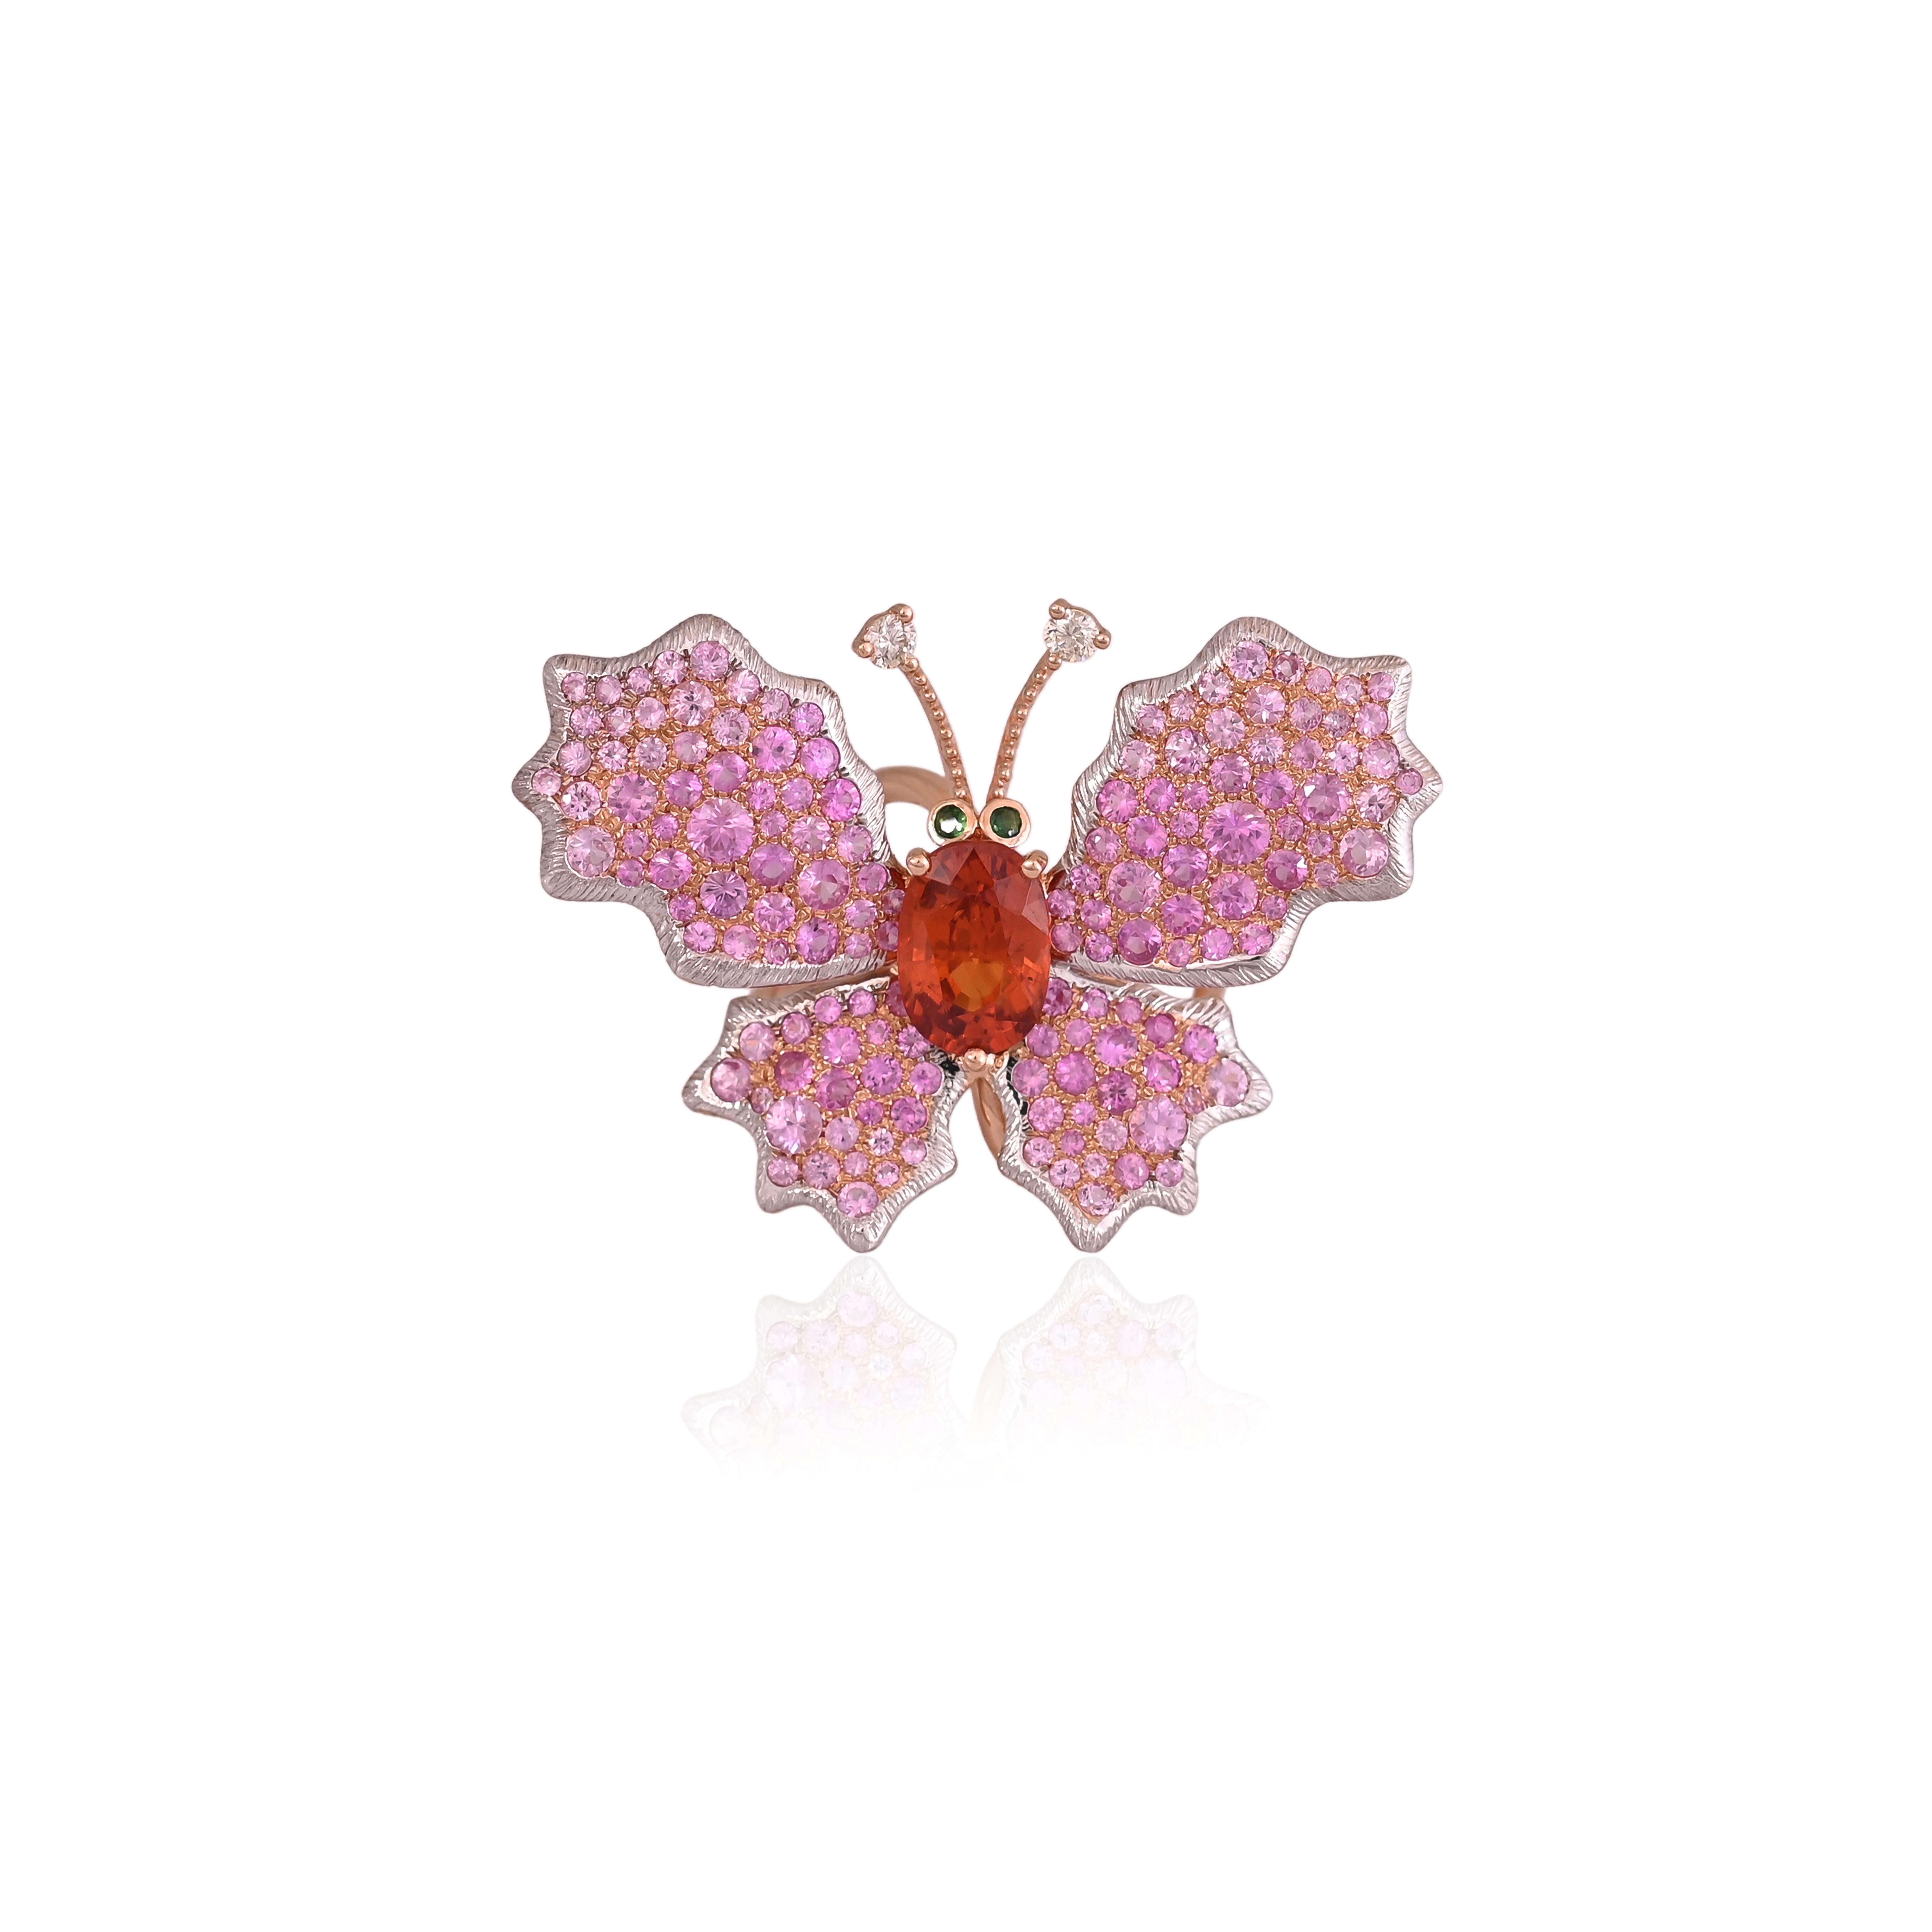 A very gorgeous and modern, Spessartite Garnett & Pink Sapphires Cocktail Ring set in 18K Rose Gold & Diamonds. The weight of the Spessatite Garnett is 3.22 carats. The Garnett is completely natural, without any treatment and is of Madagascar